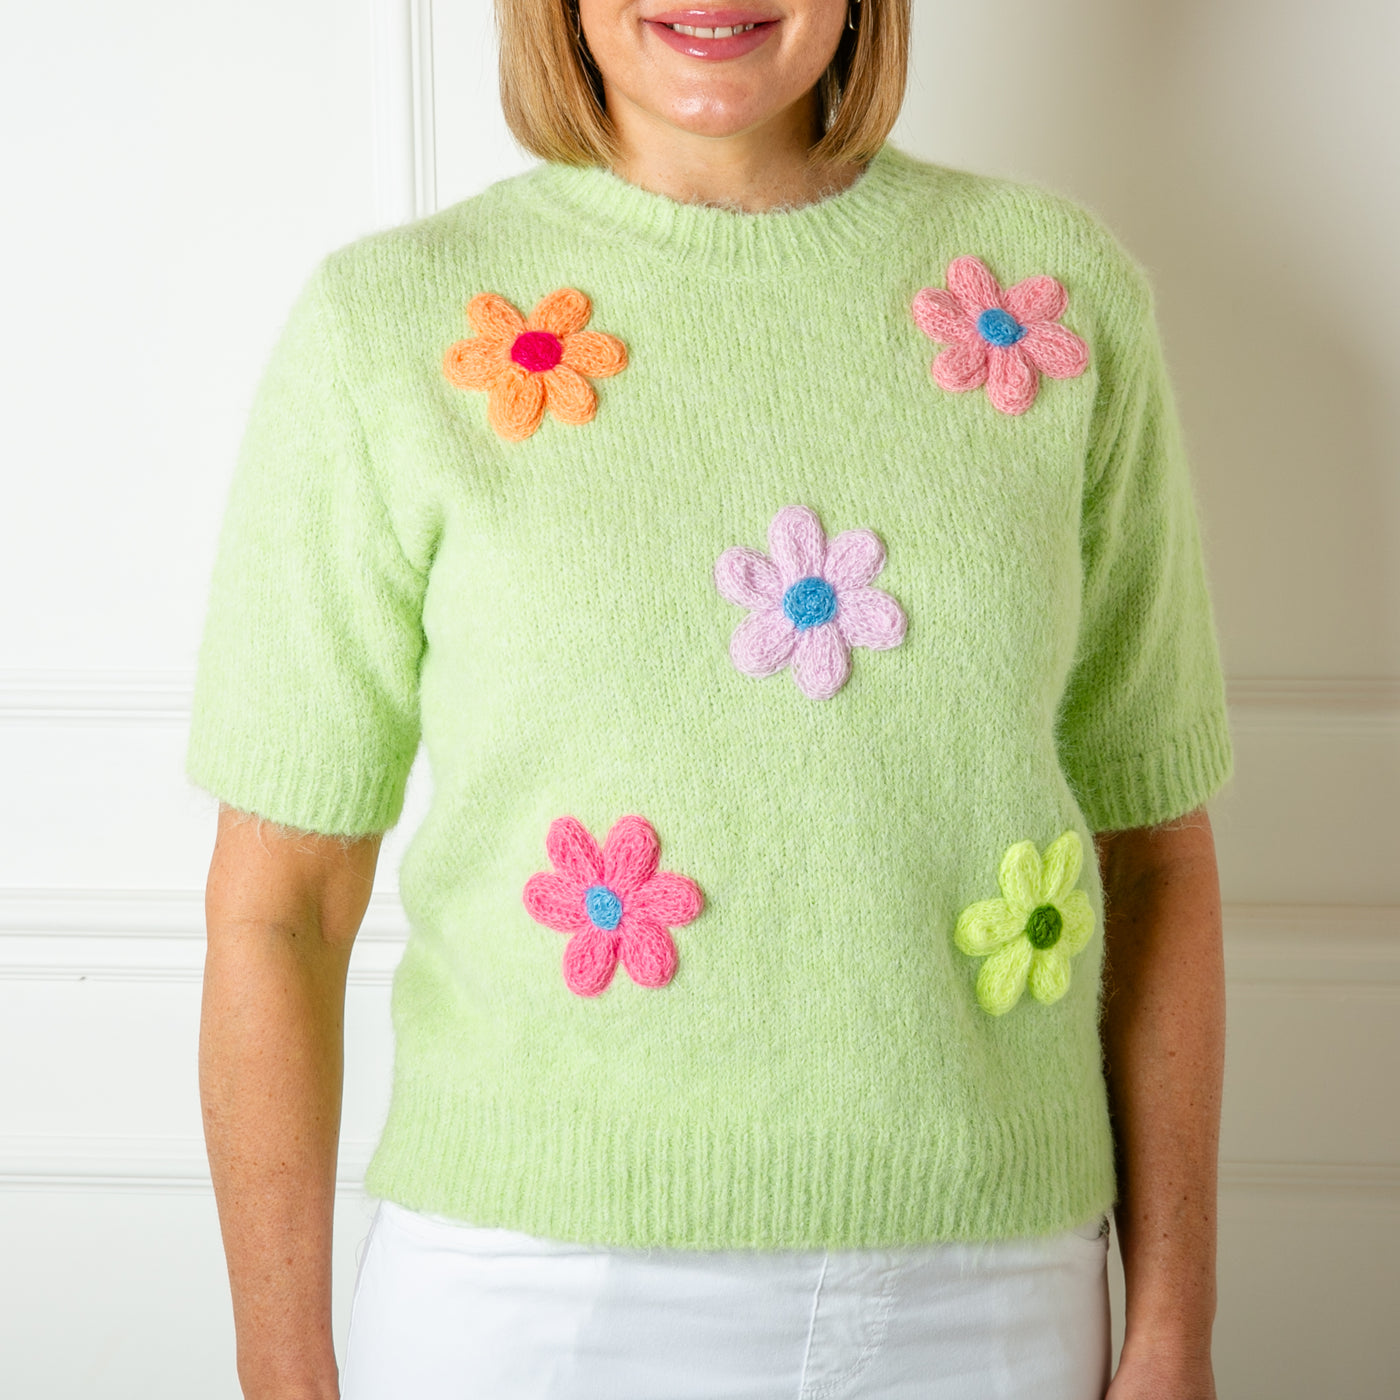 The green Short Sleeve Daisy Jumper with 3/4 length sleeves and a round neckline